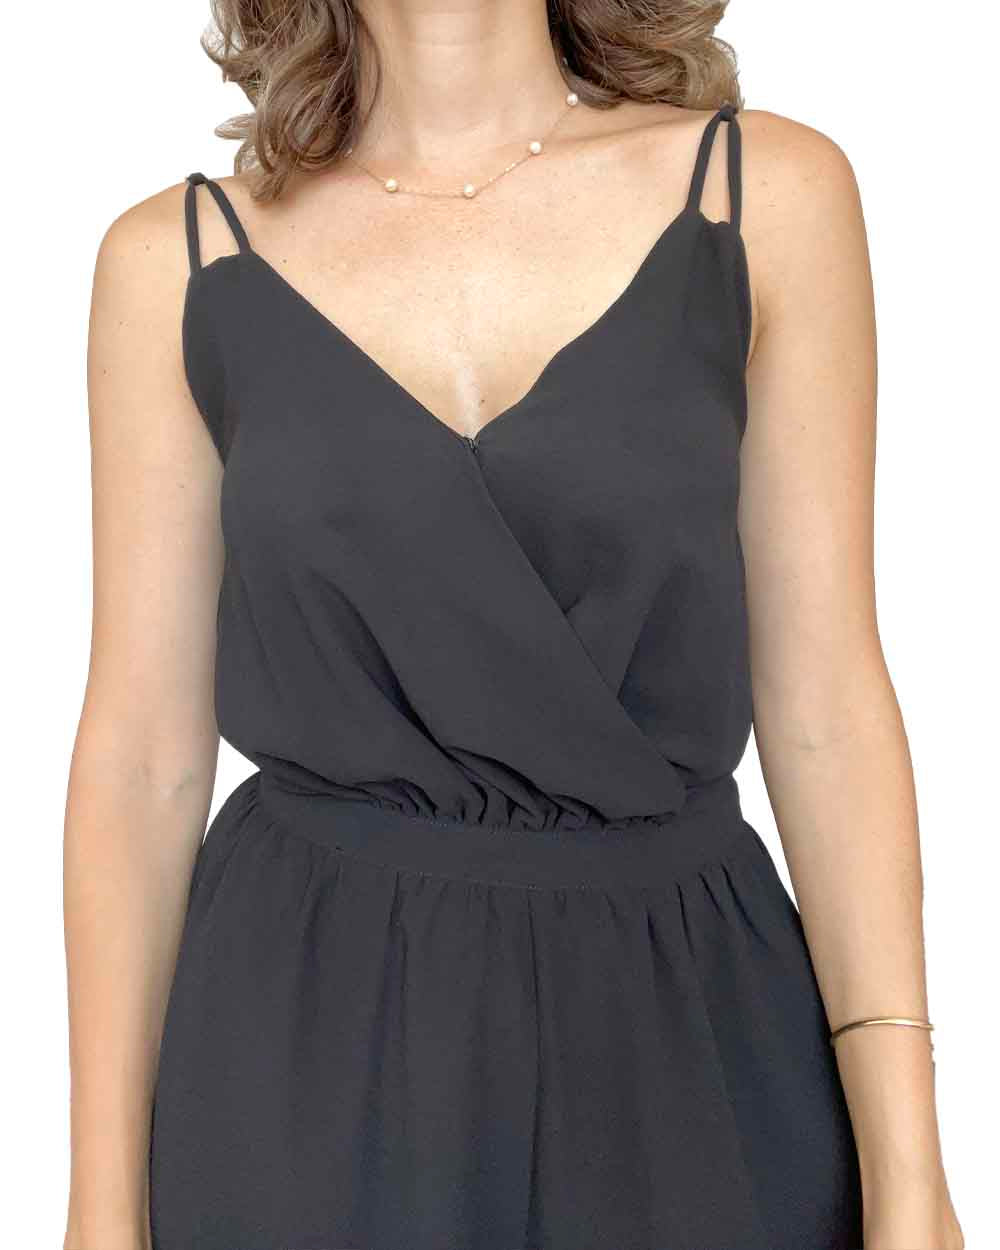 Forever 21 - talla S